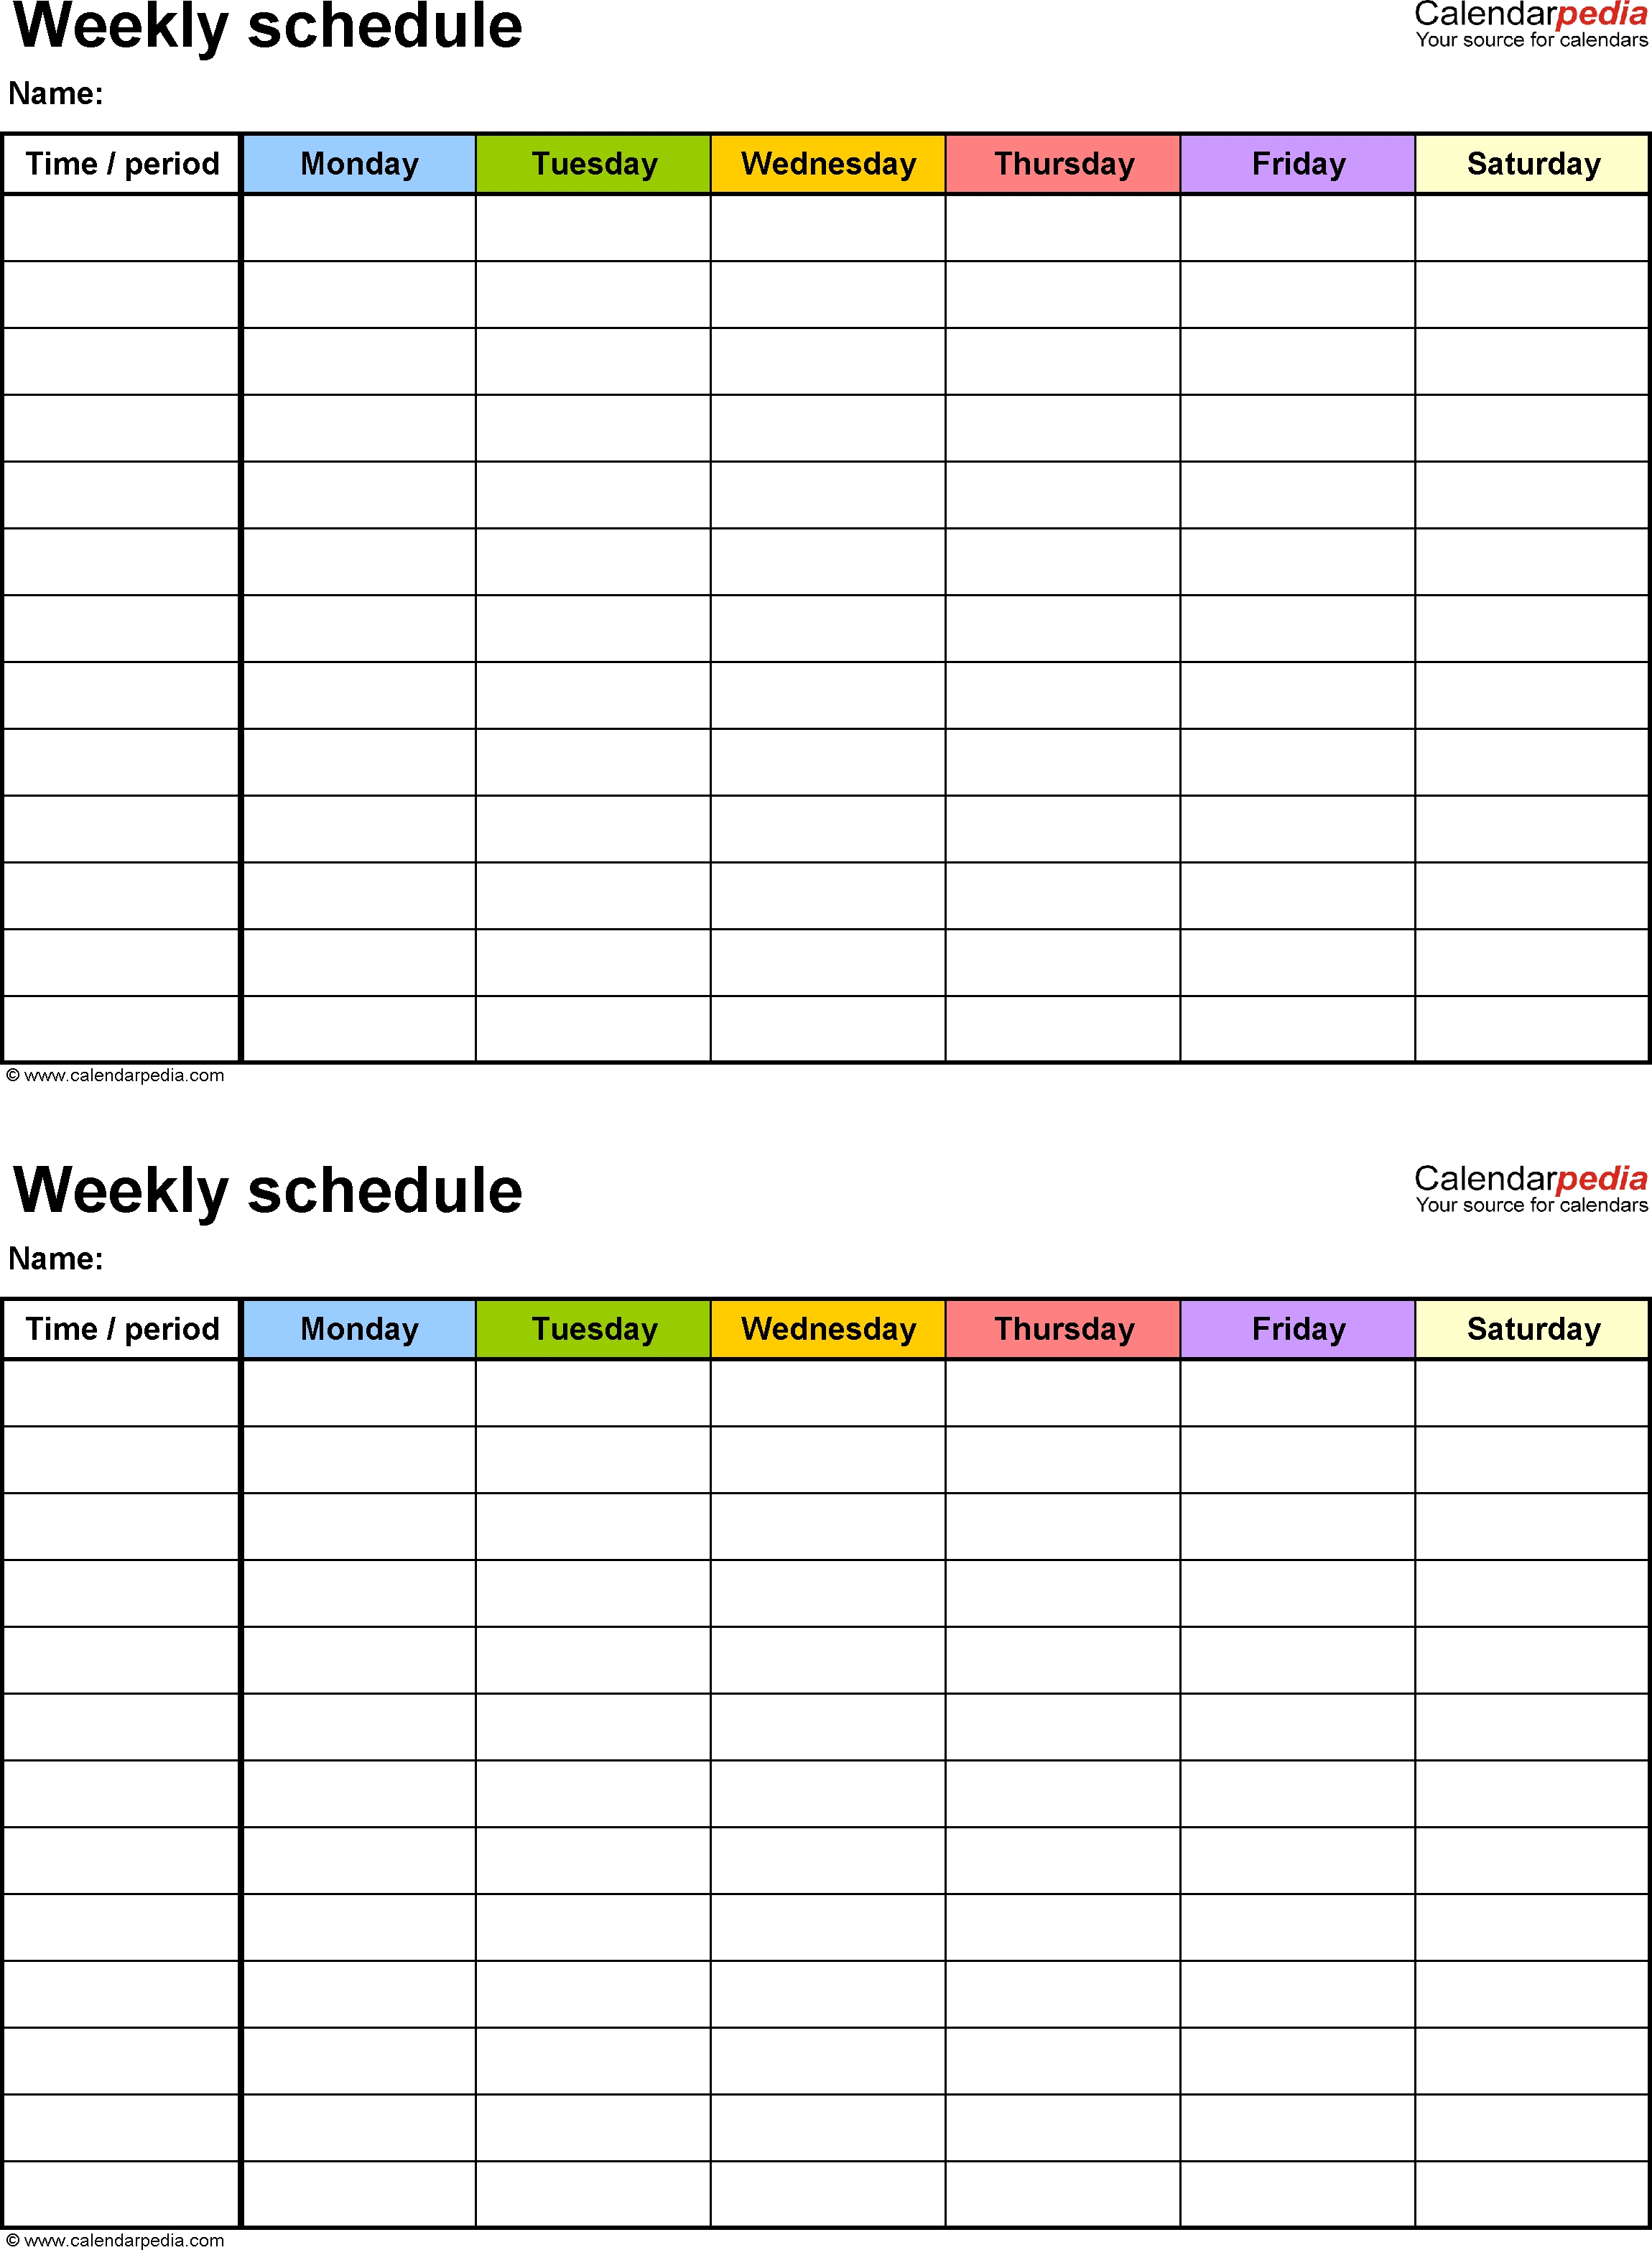 Free Weekly Schedule Templates For Word - 18 Templates  Printable Weekly Schedule Monday Through Friday